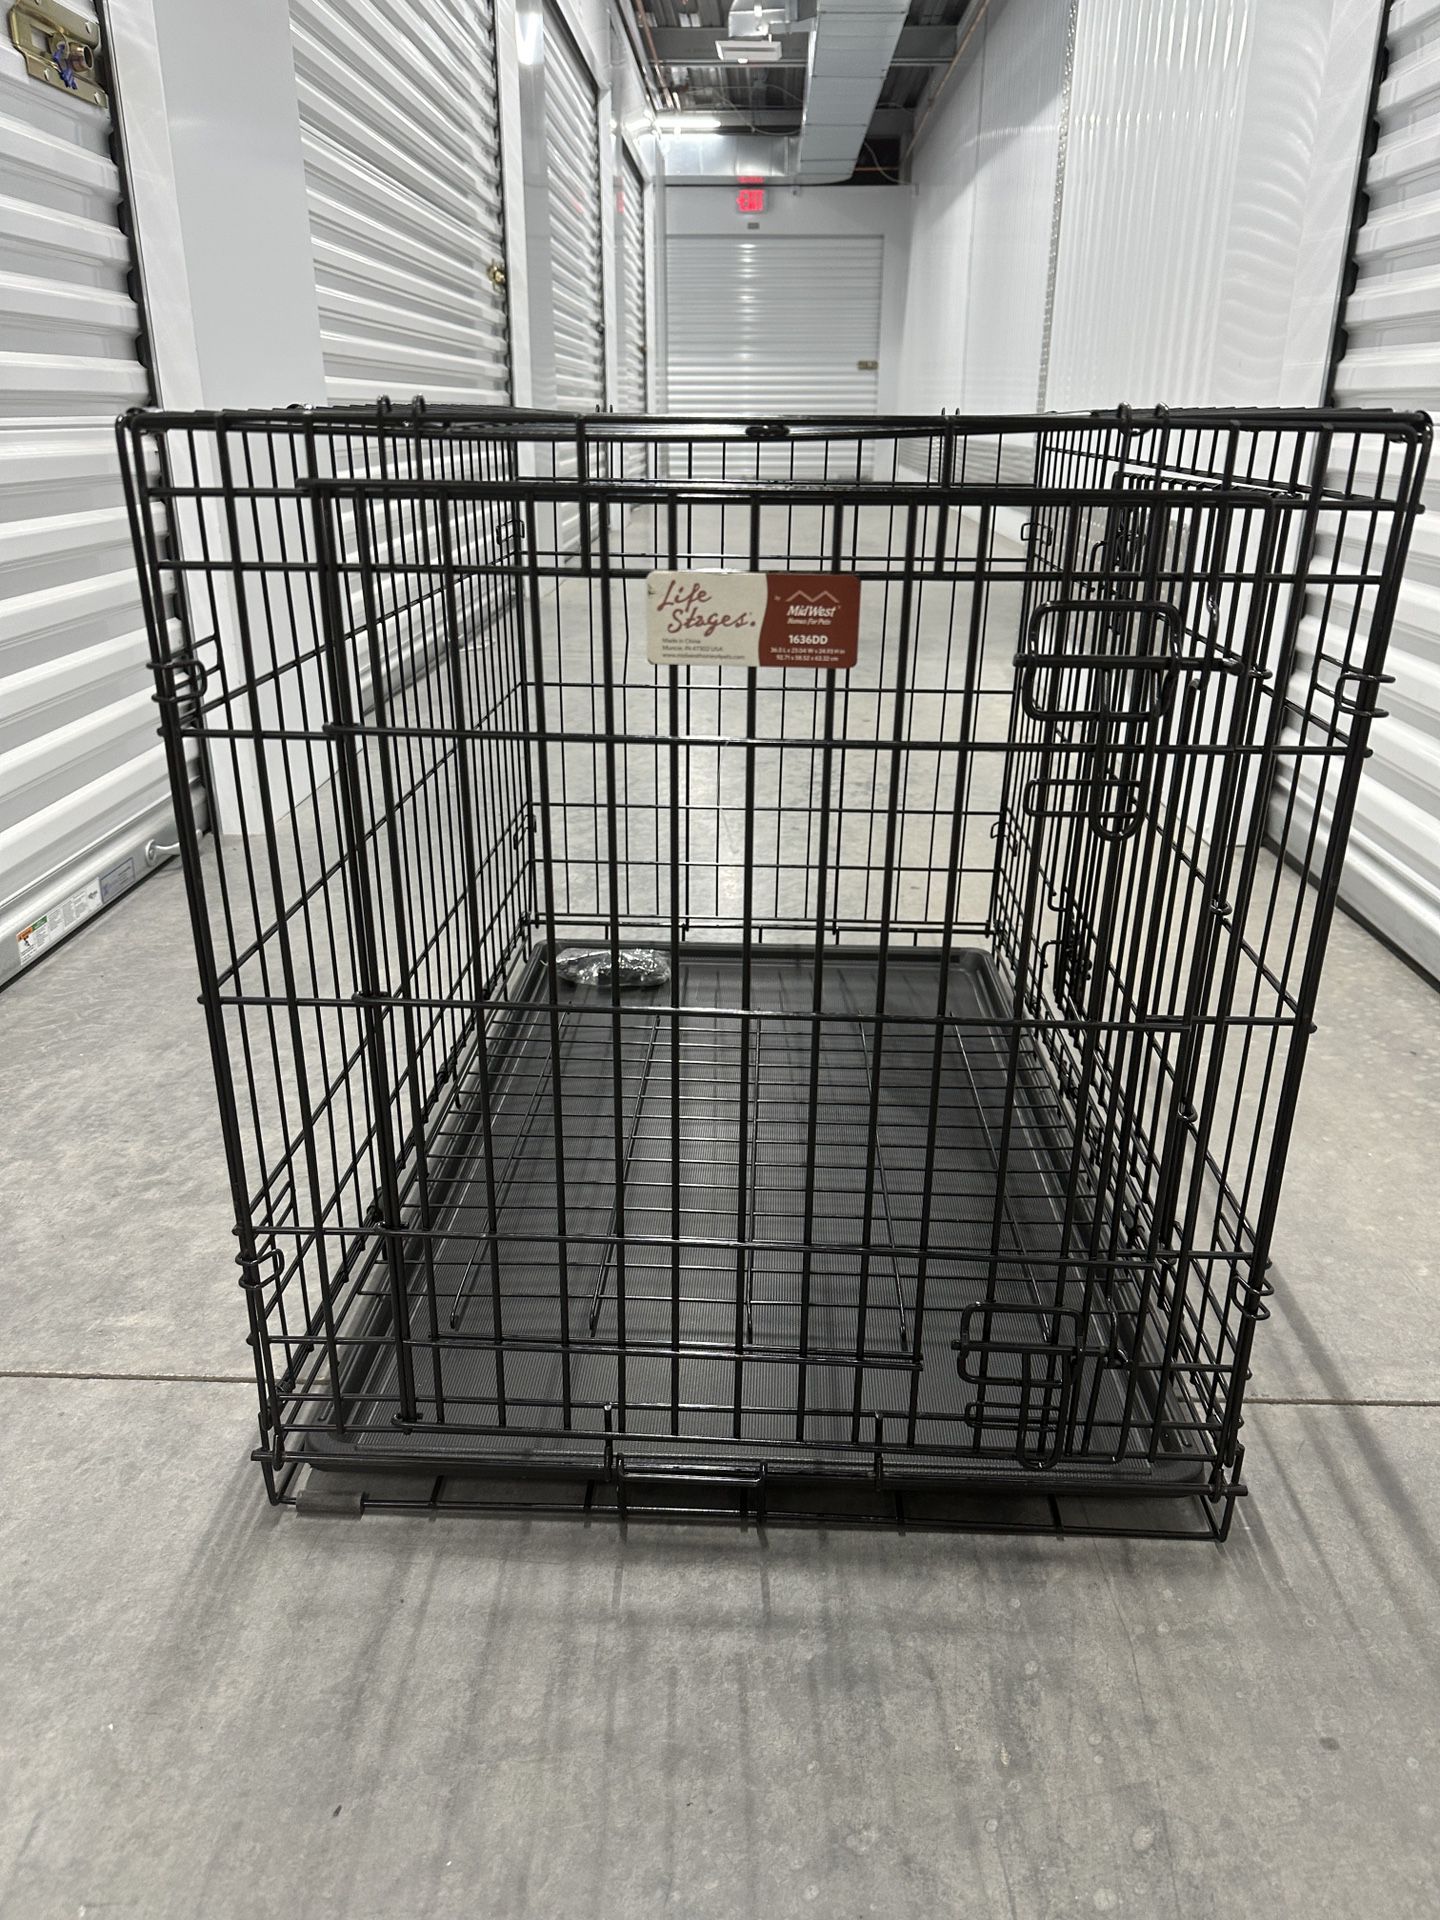 MidWest Life Stages Dog Pen 36" 2 Doors Foldable Collapsible Divider Leak Proof Pan